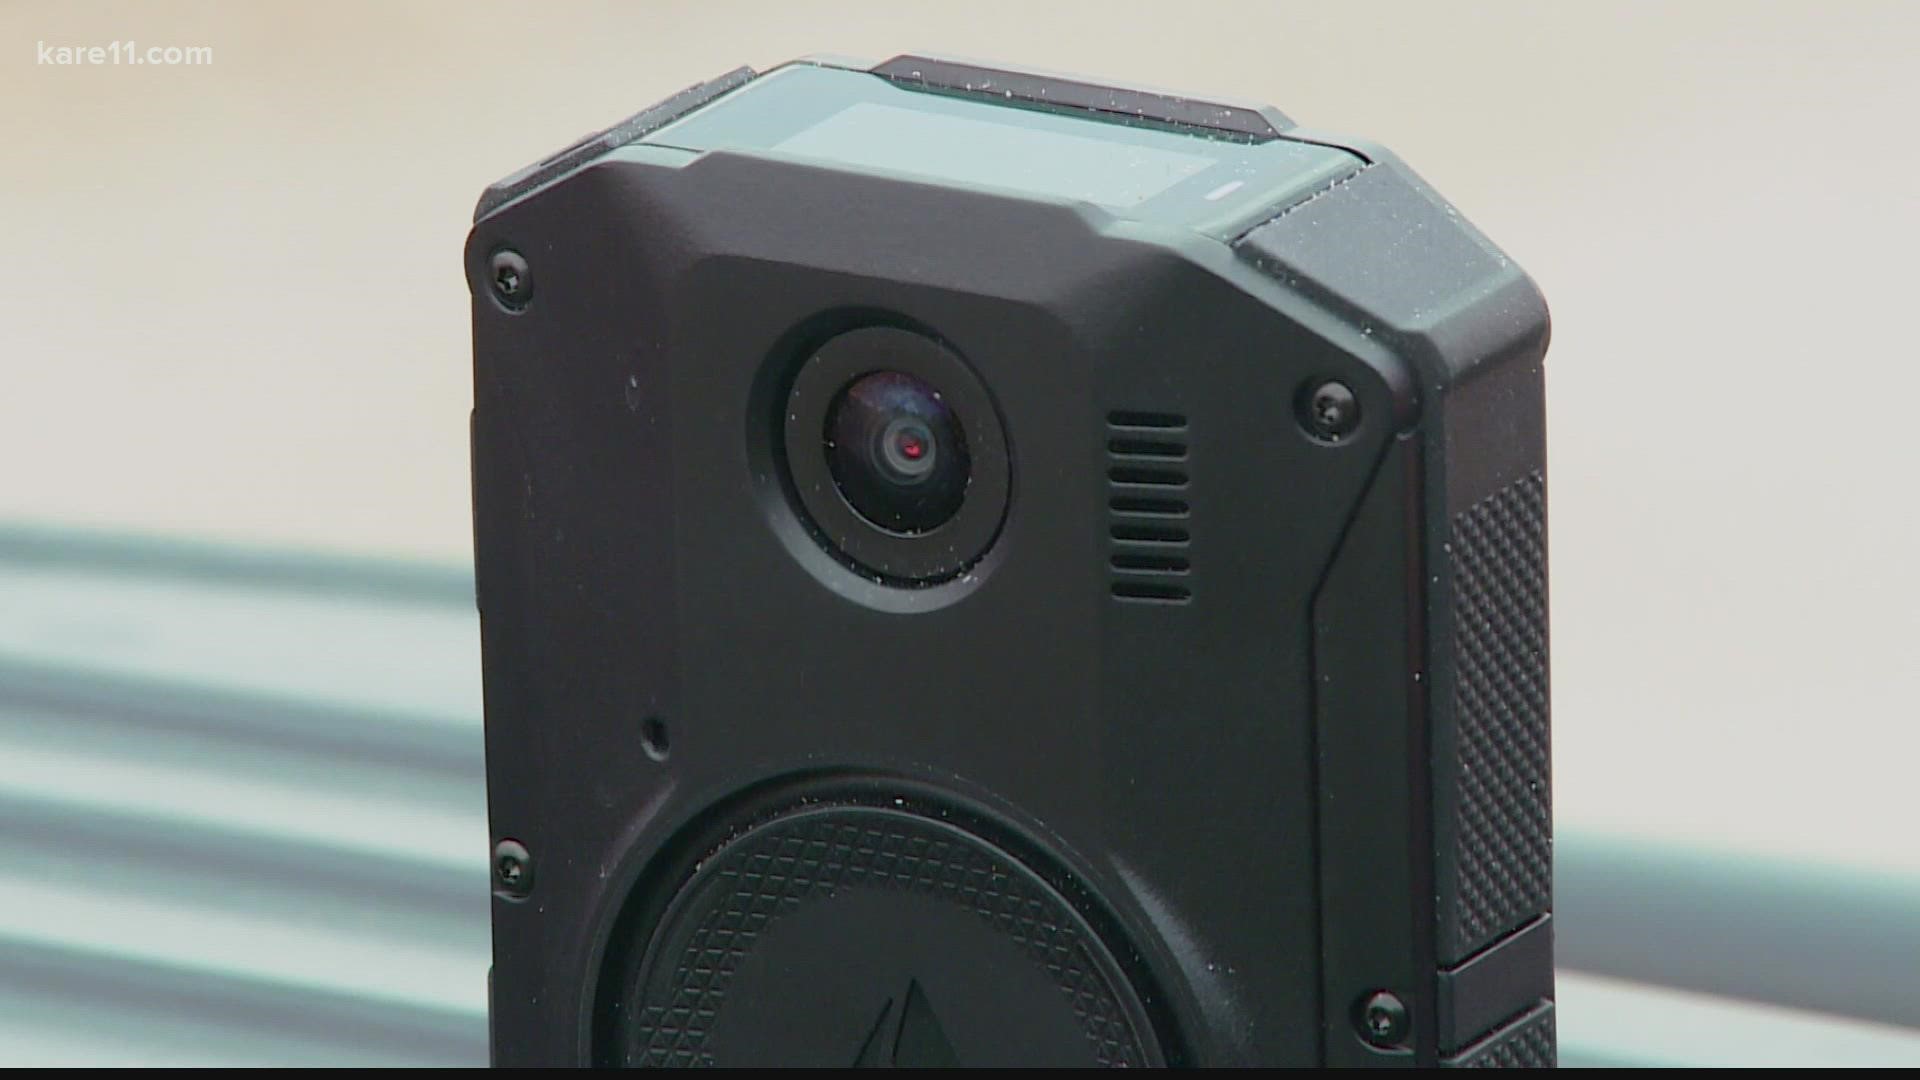 The patrol says troopers will be wearing and using the body cameras by June 30.